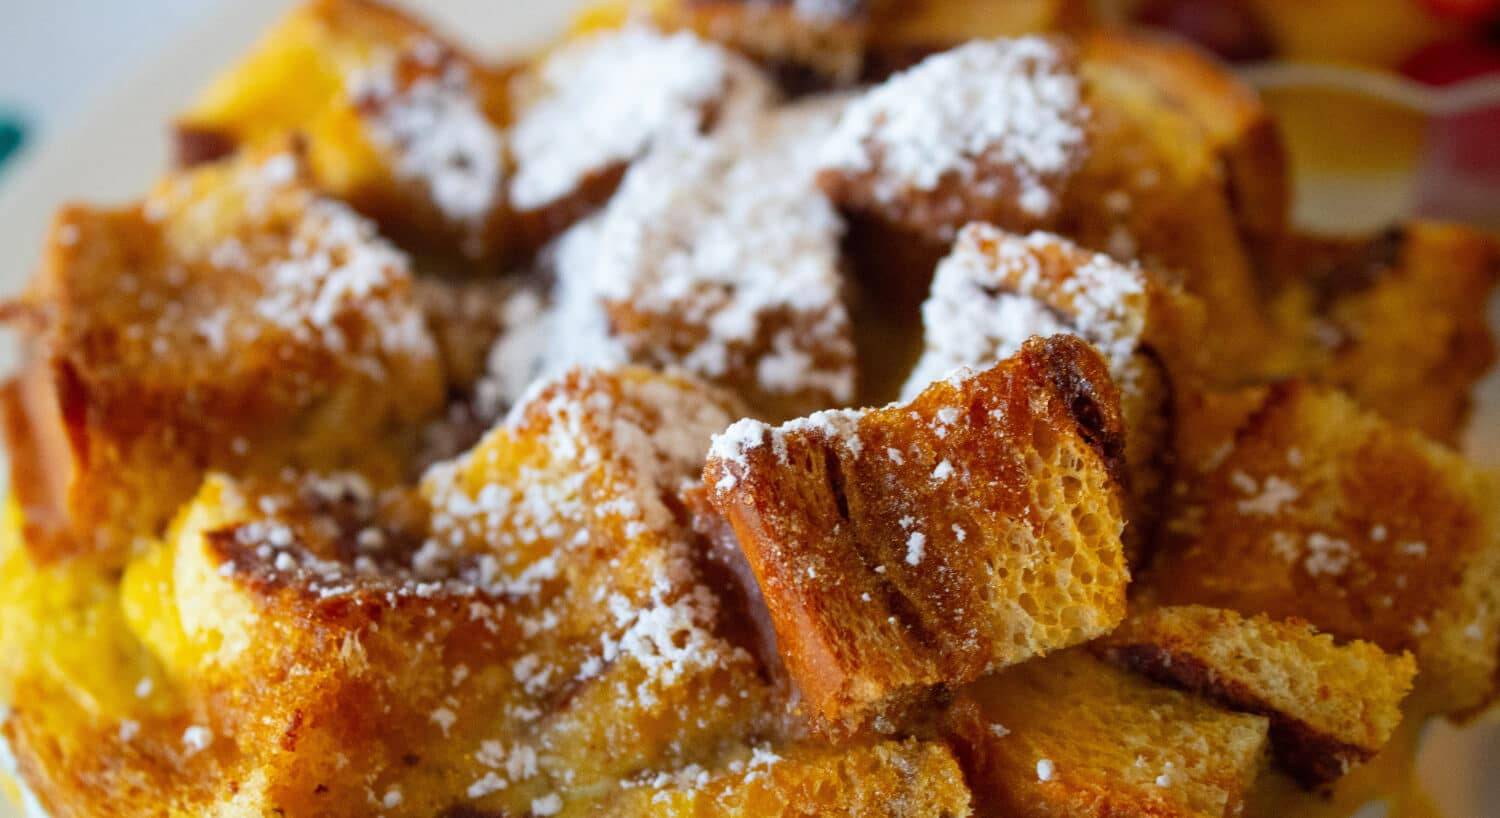 Pieces of golden bread cubes, baked and sprinkled with powdered sugar